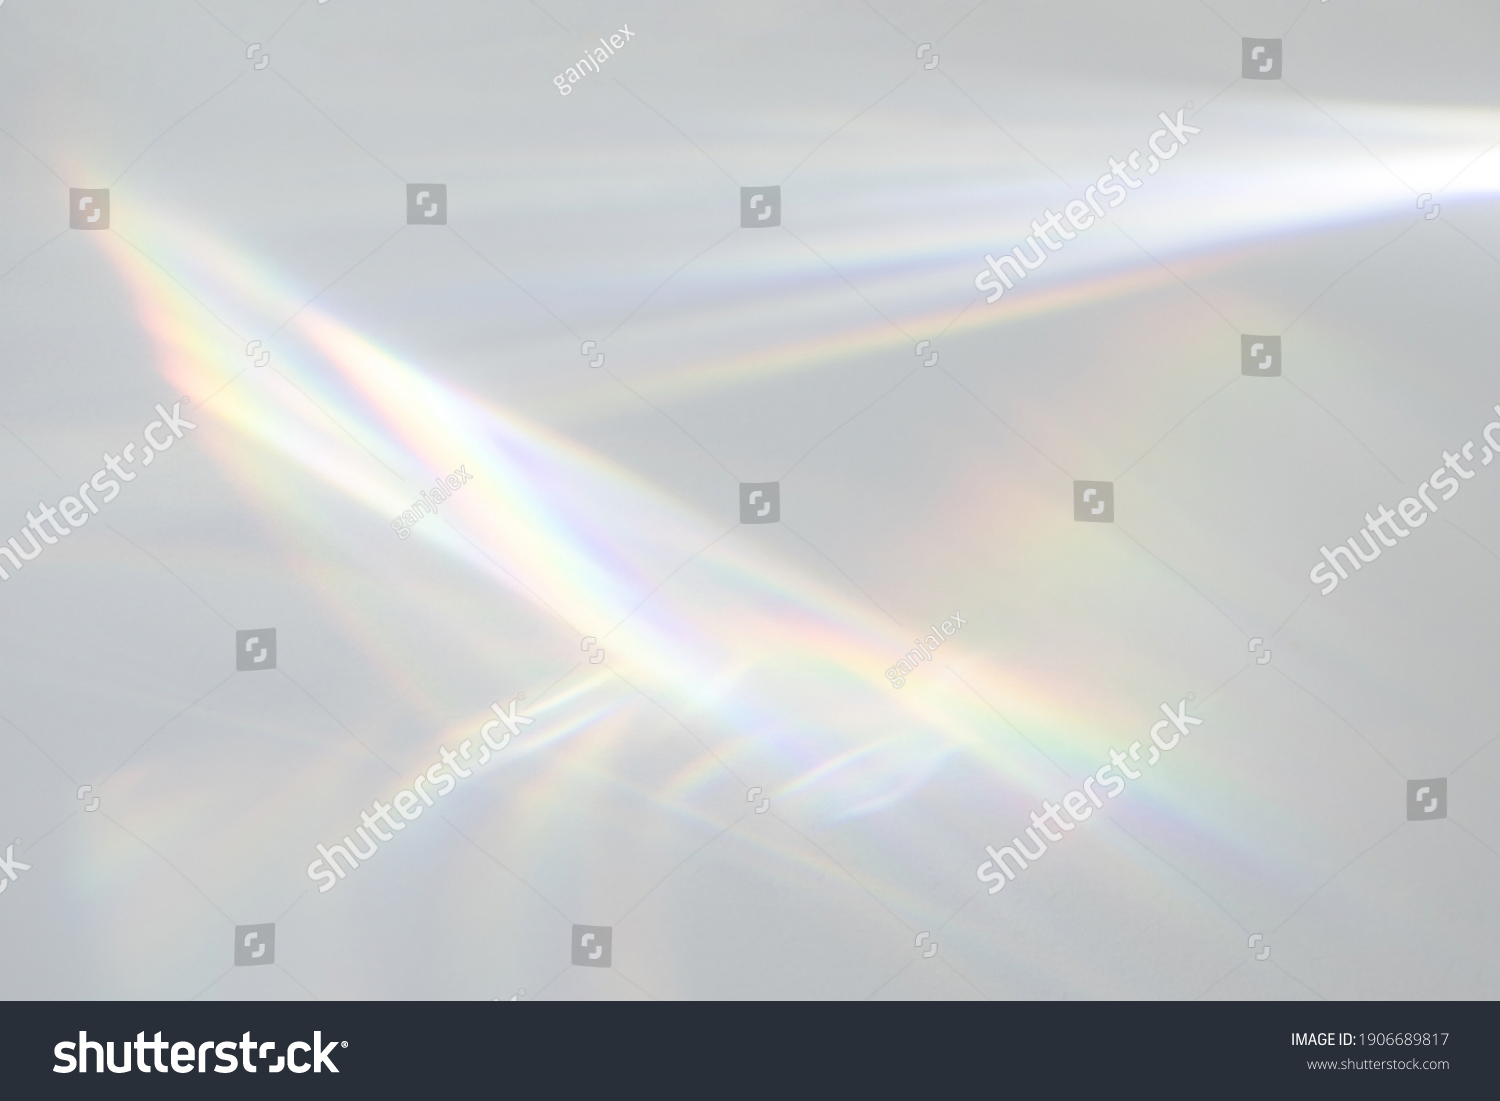 Blurred water texture overlay effect for photo and mockups. Organic drop diagonal shadow and light caustic effect on a white wall. Shadows for natural light effects #1906689817